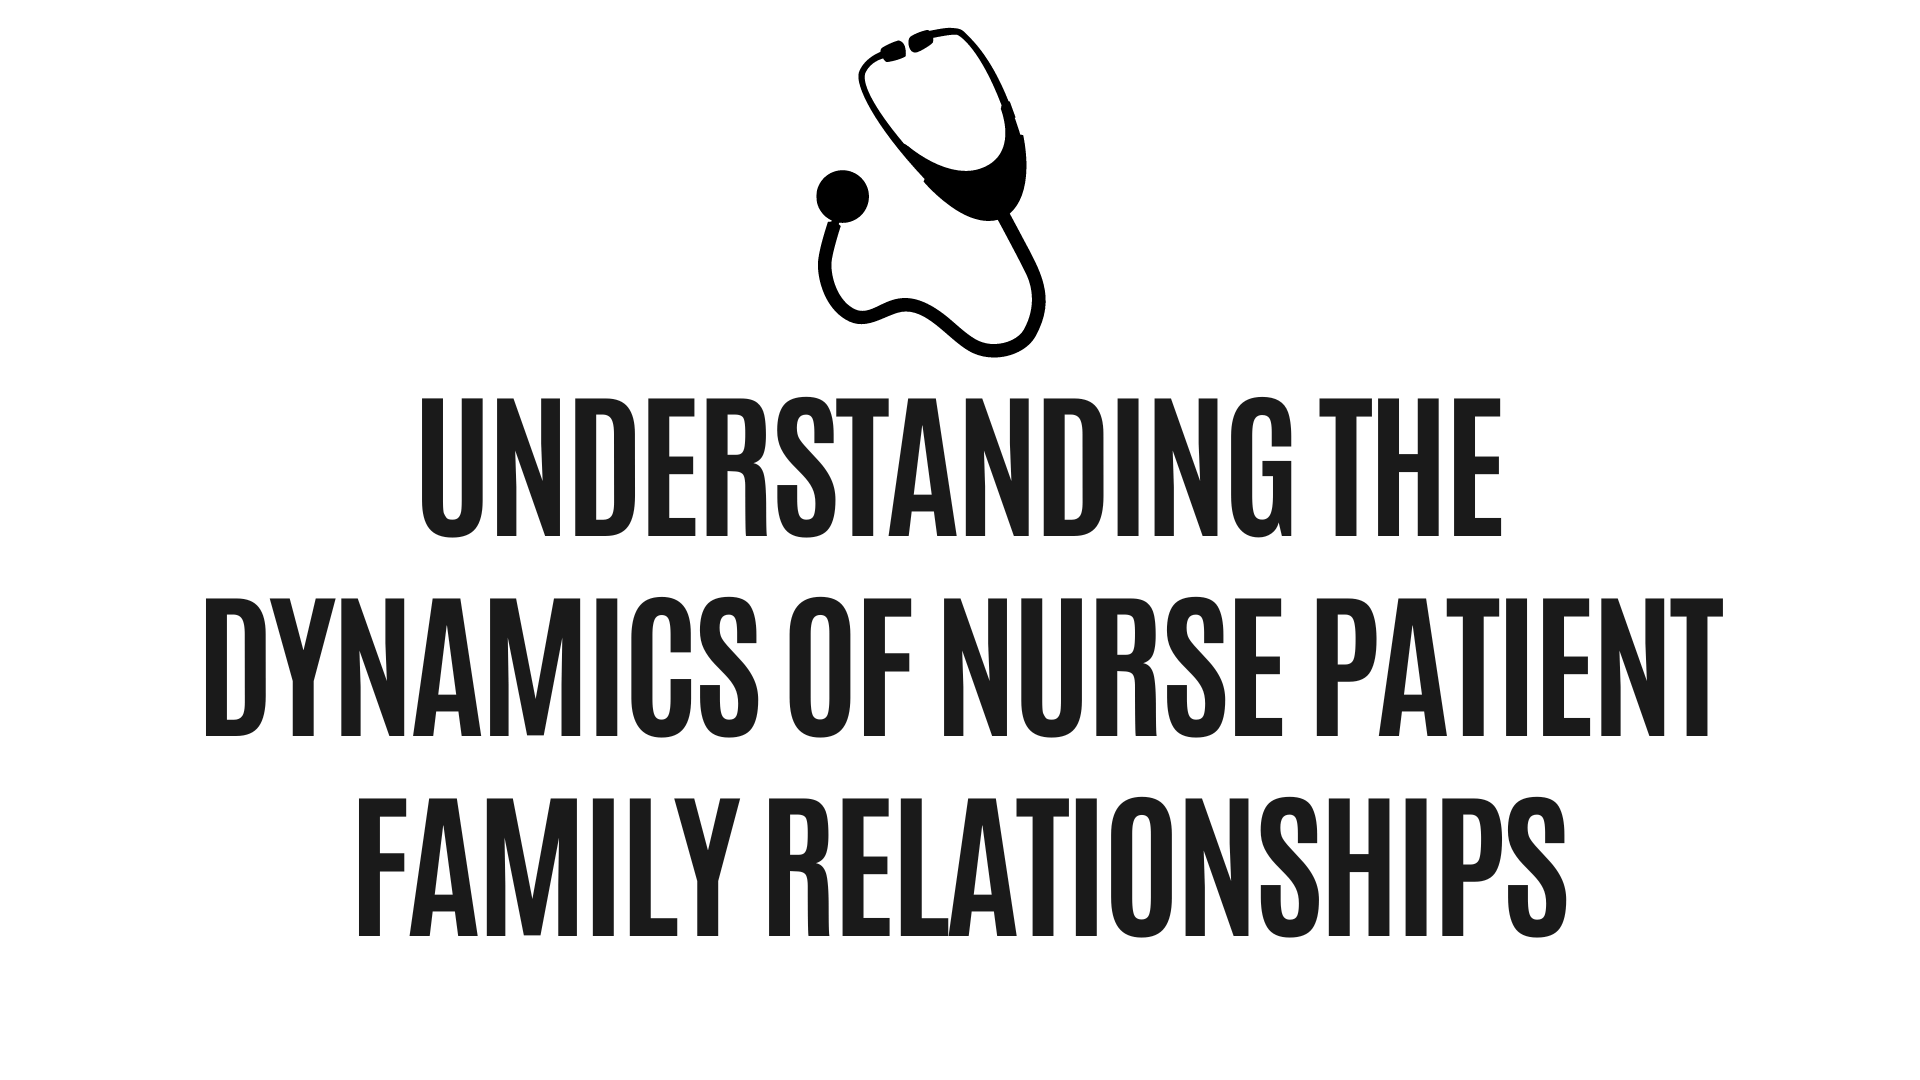 Understanding the Dynamics of Nurse Patient Family Relationships